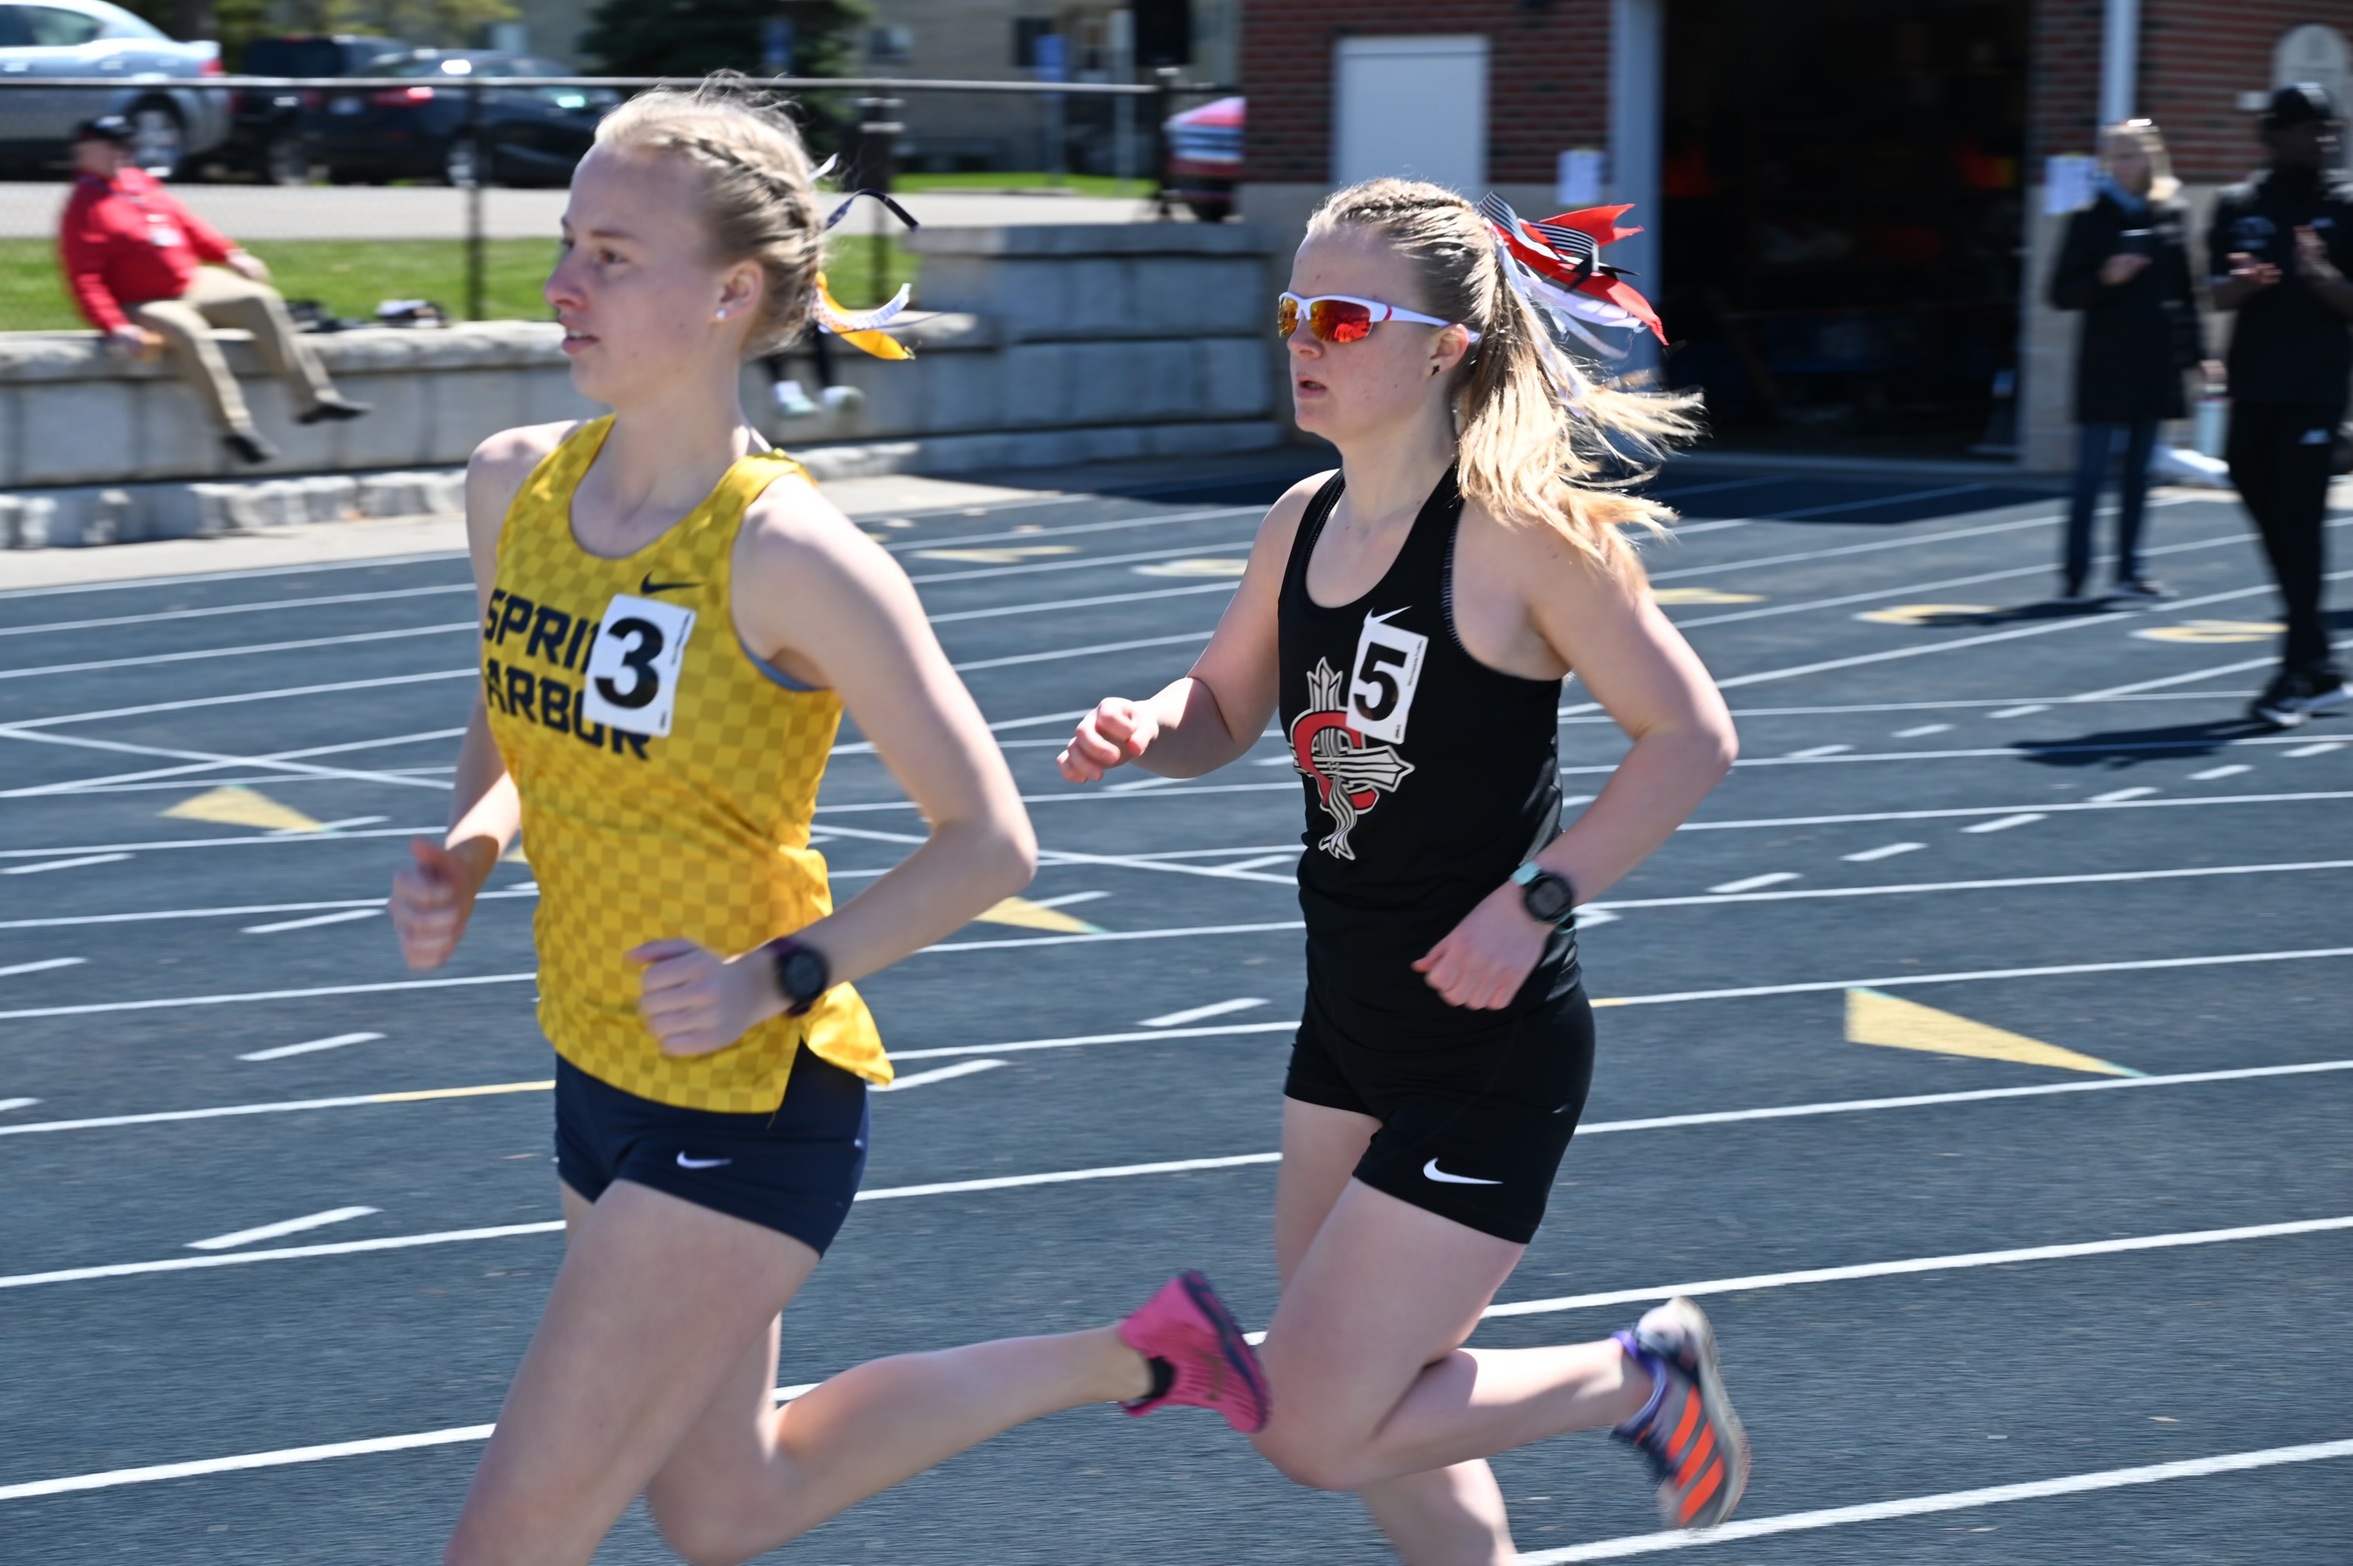 Women's Track &amp; Field saw Distance Runners excel on day 2 of Tiffin Carnival